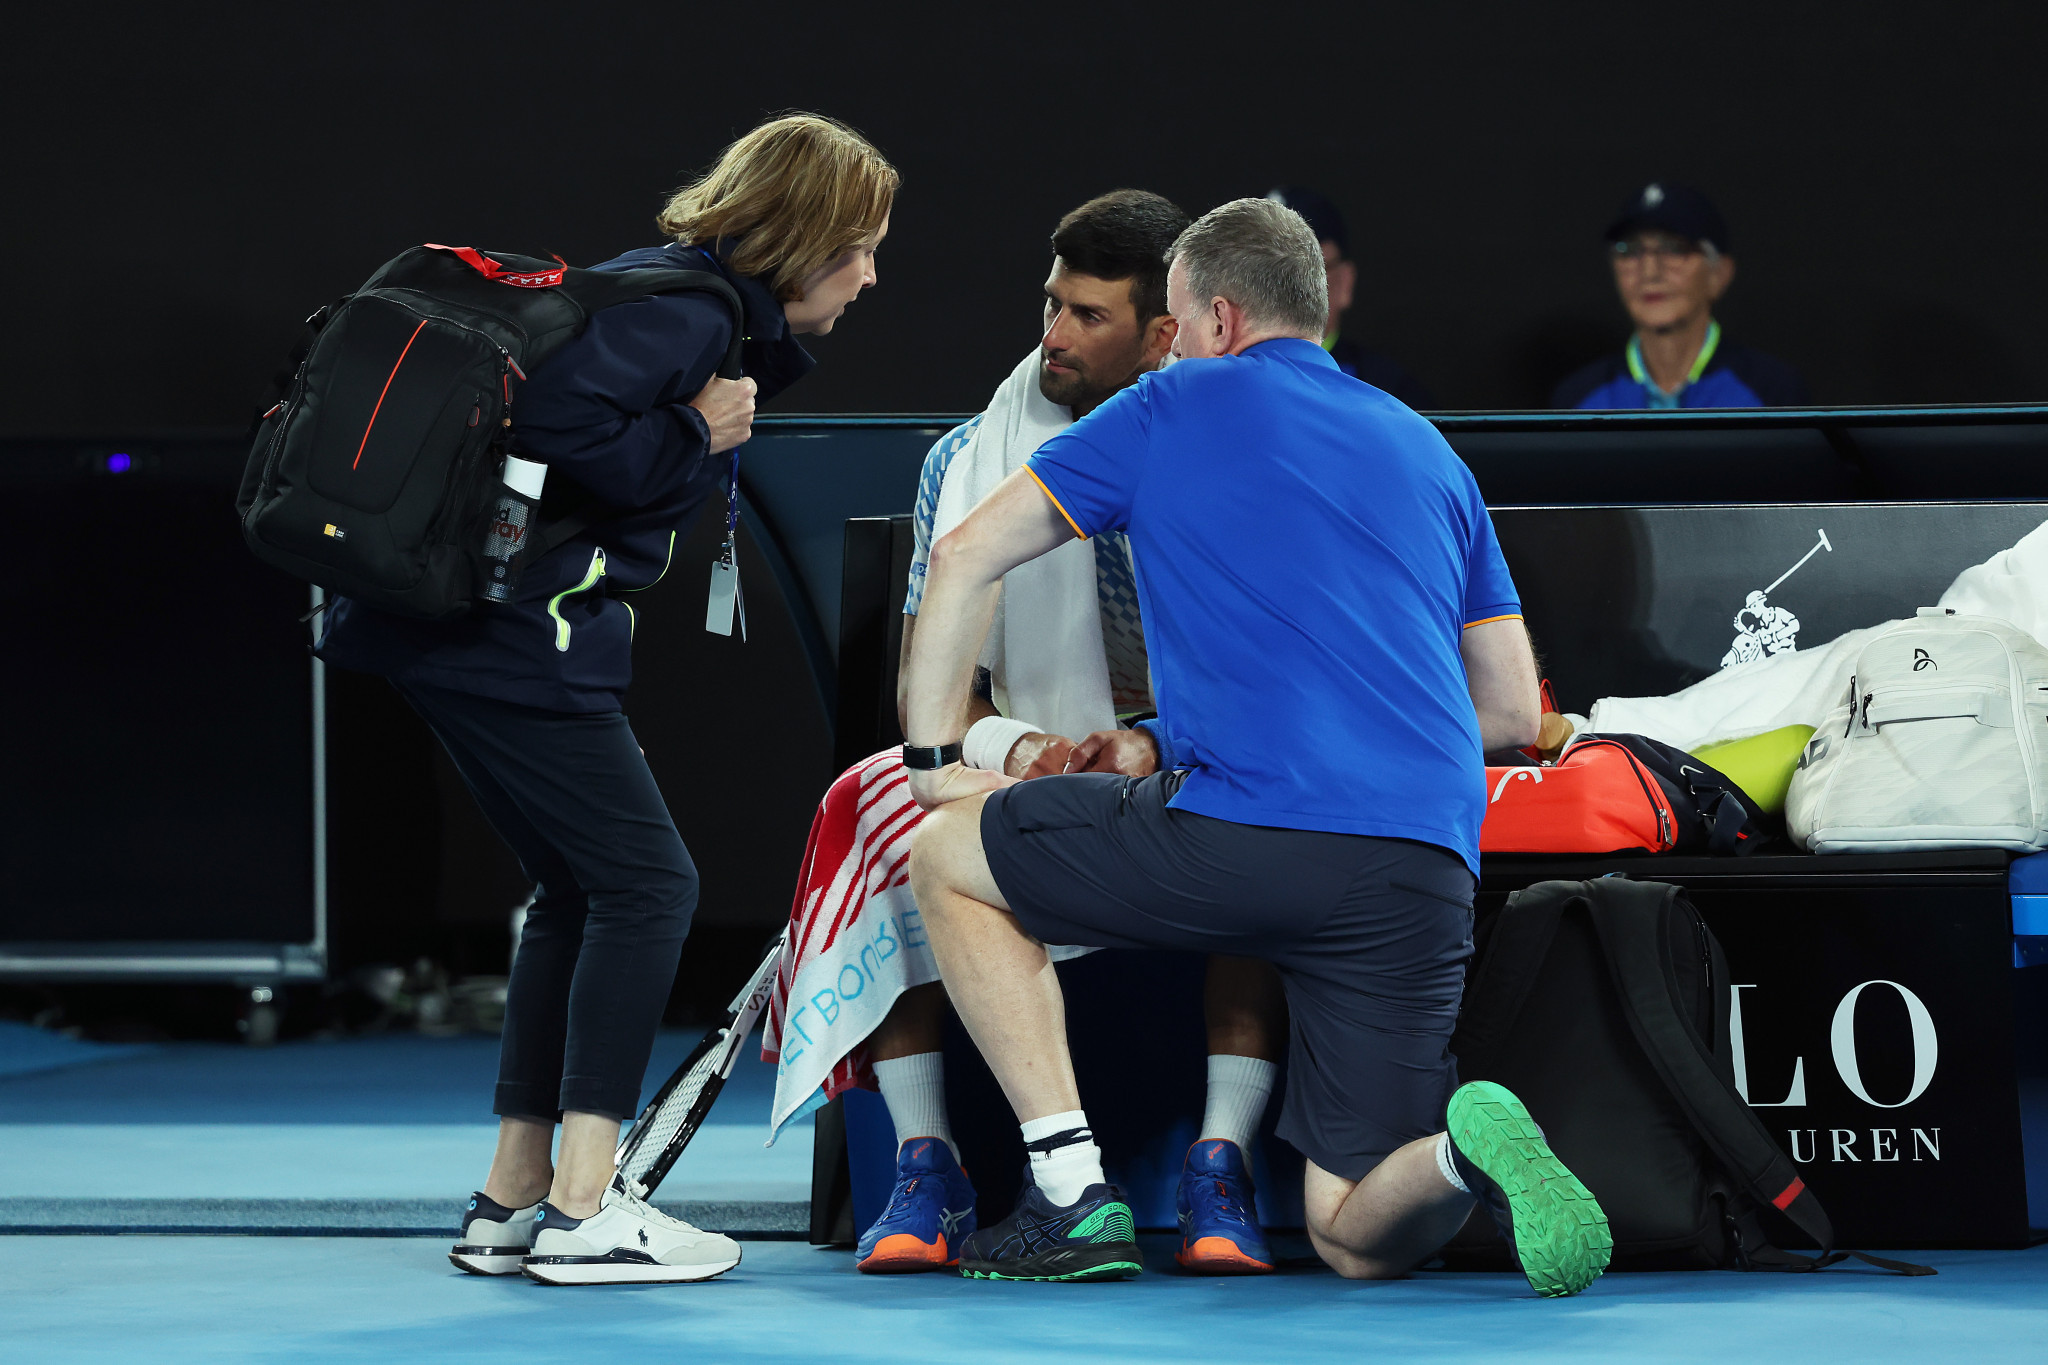 Nine-time winner Djokovic struggled with an existing hamstring injury, and had to take a medical timeout during the match ©Getty Images